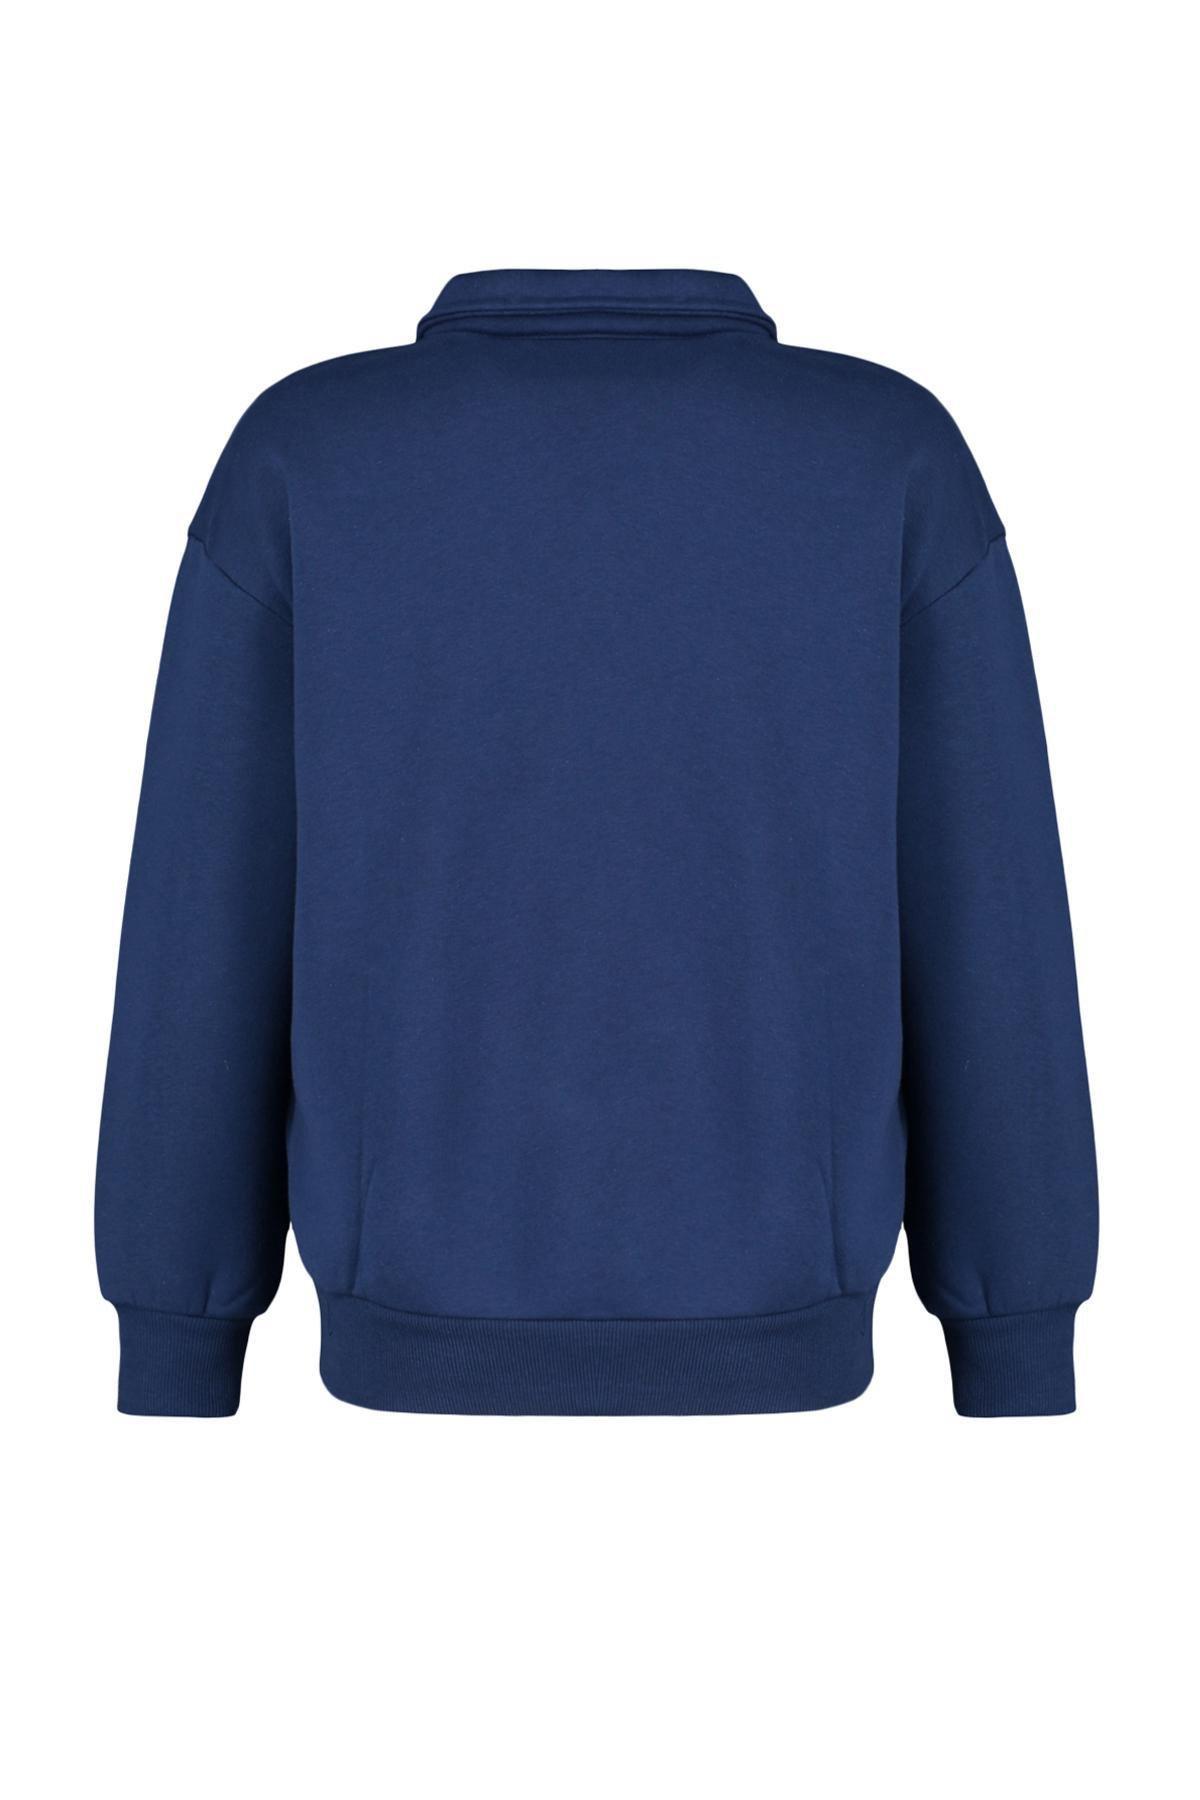 Trendyol - Navy Polo Collar Embroidered Knitted Sweatshirt